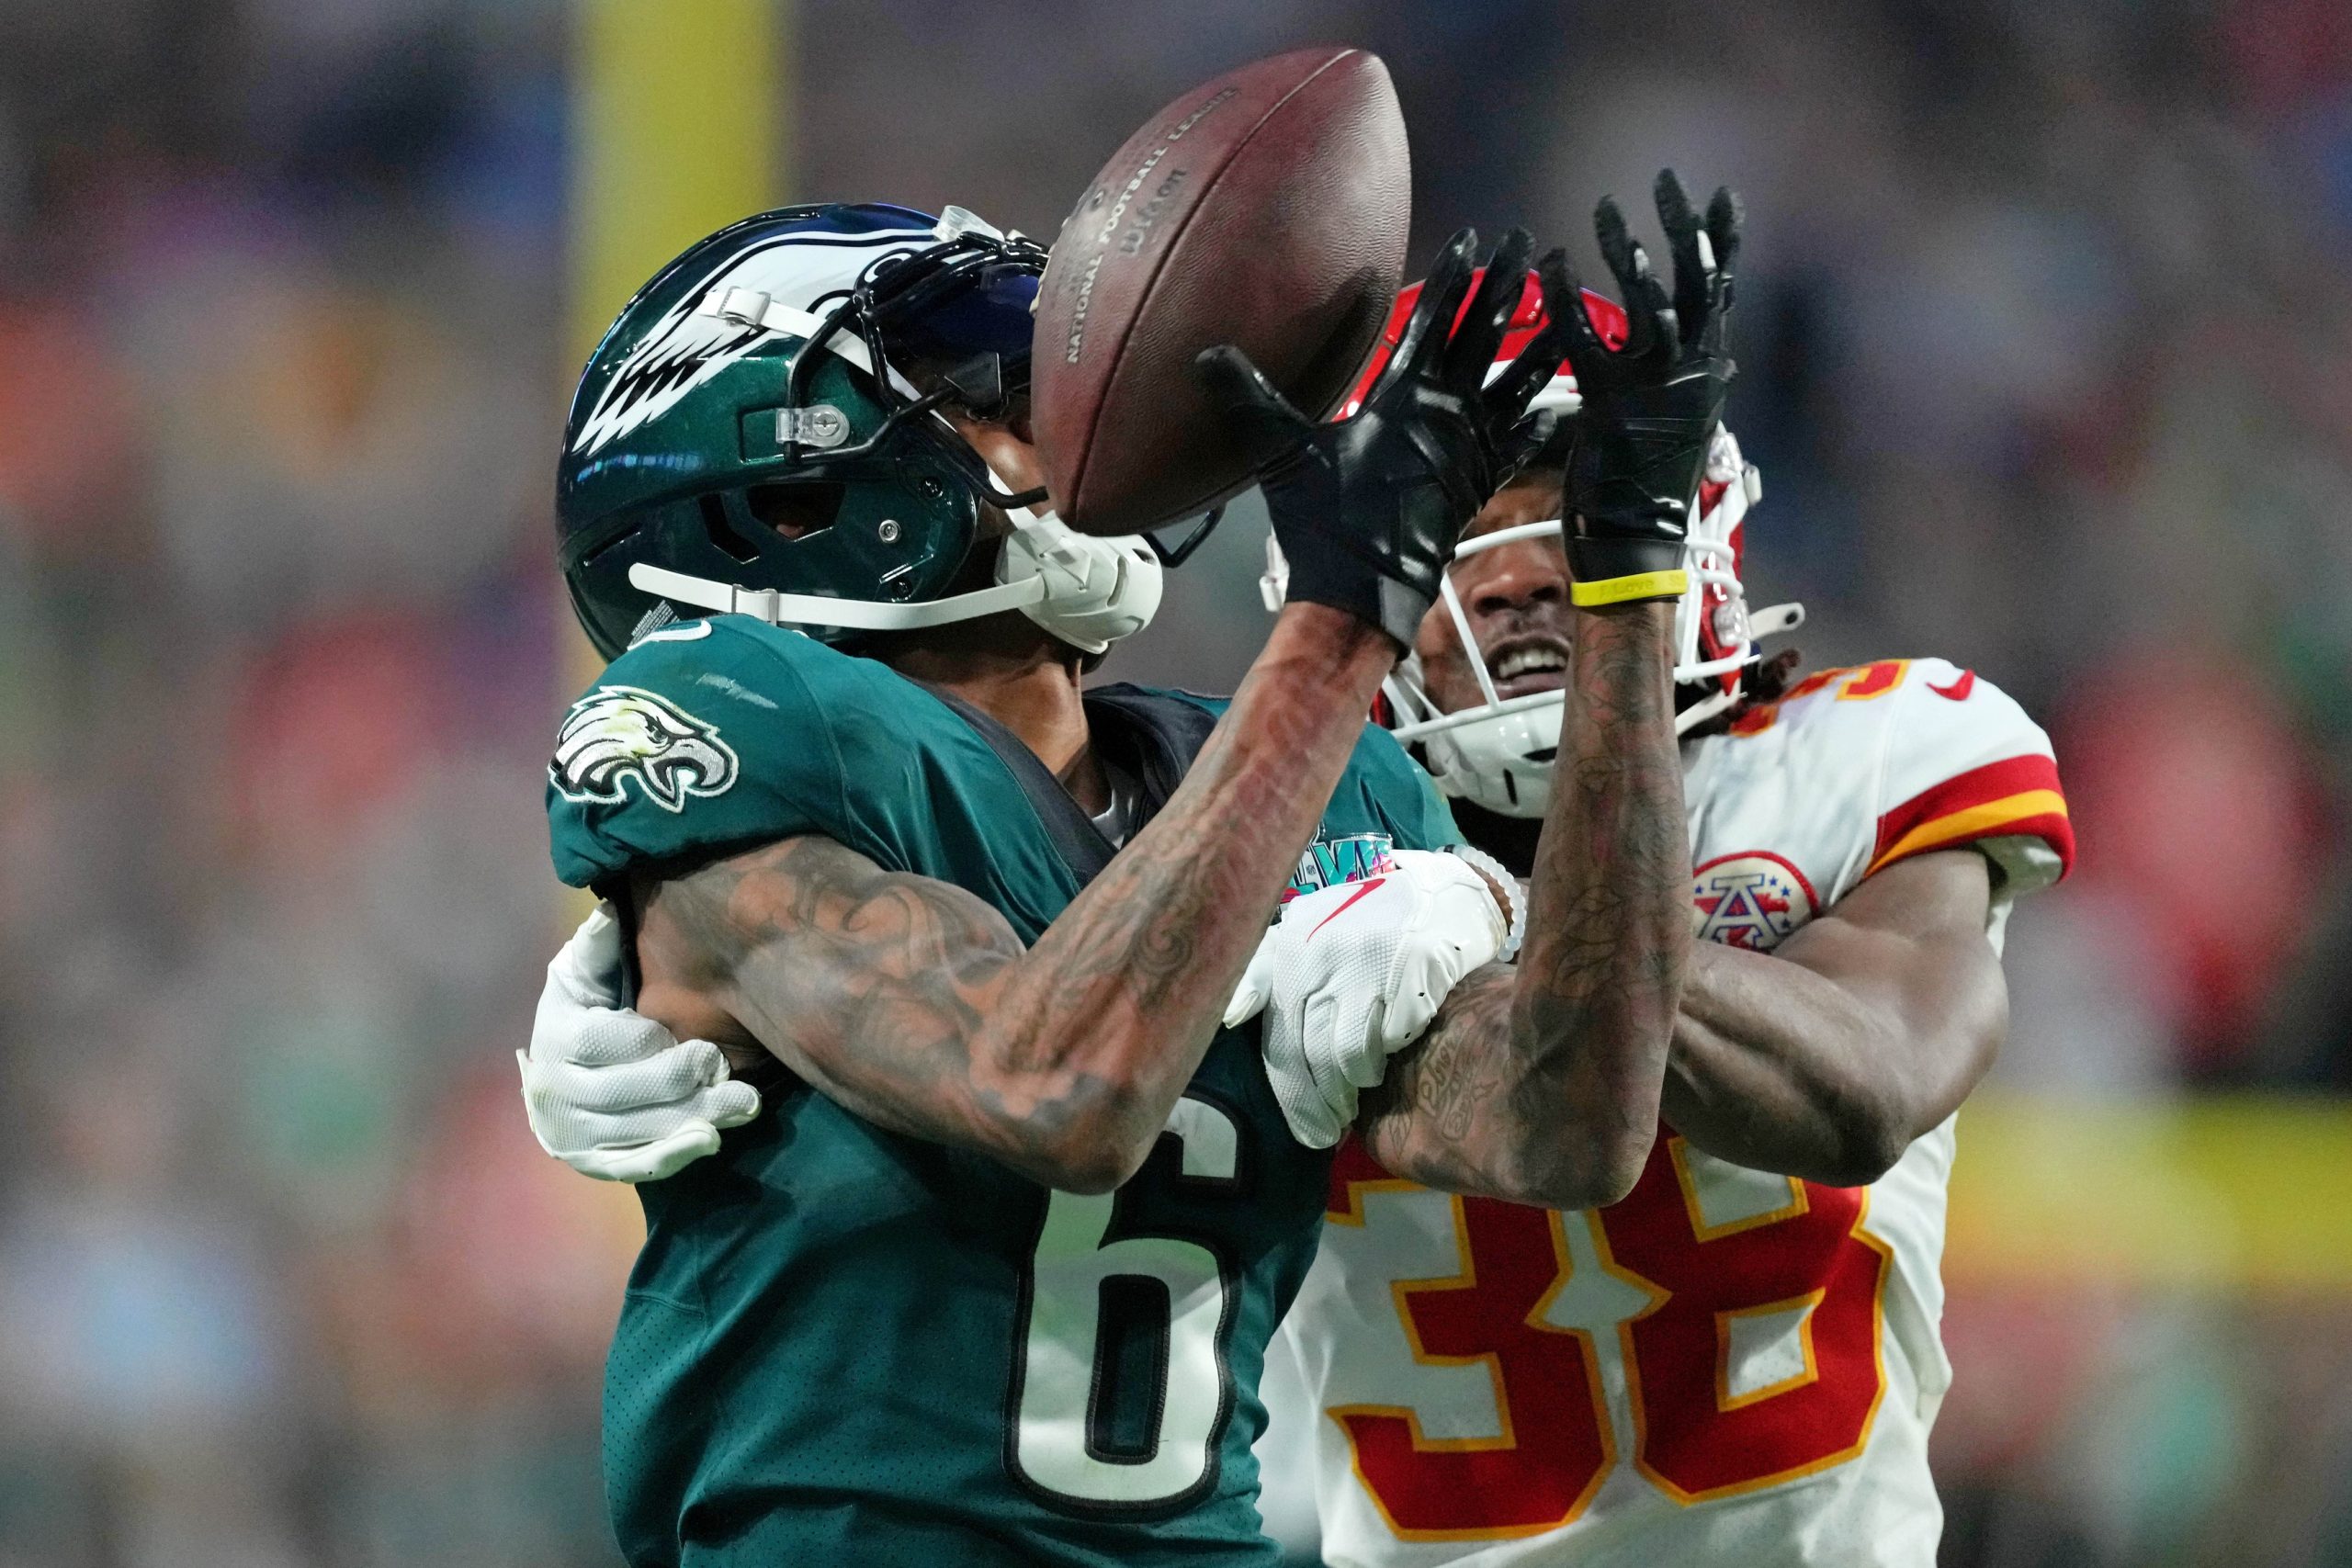 Feb 12, 2023; Glendale, Arizona, US; Philadelphia Eagles wide receiver DeVonta Smith (6) is unable to make a catch against Kansas City Chiefs cornerback L'Jarius Sneed (38) during the second quarter of Super Bowl LVII at State Farm Stadium. Mandatory Credit: Kirby Lee-USA TODAY Sports